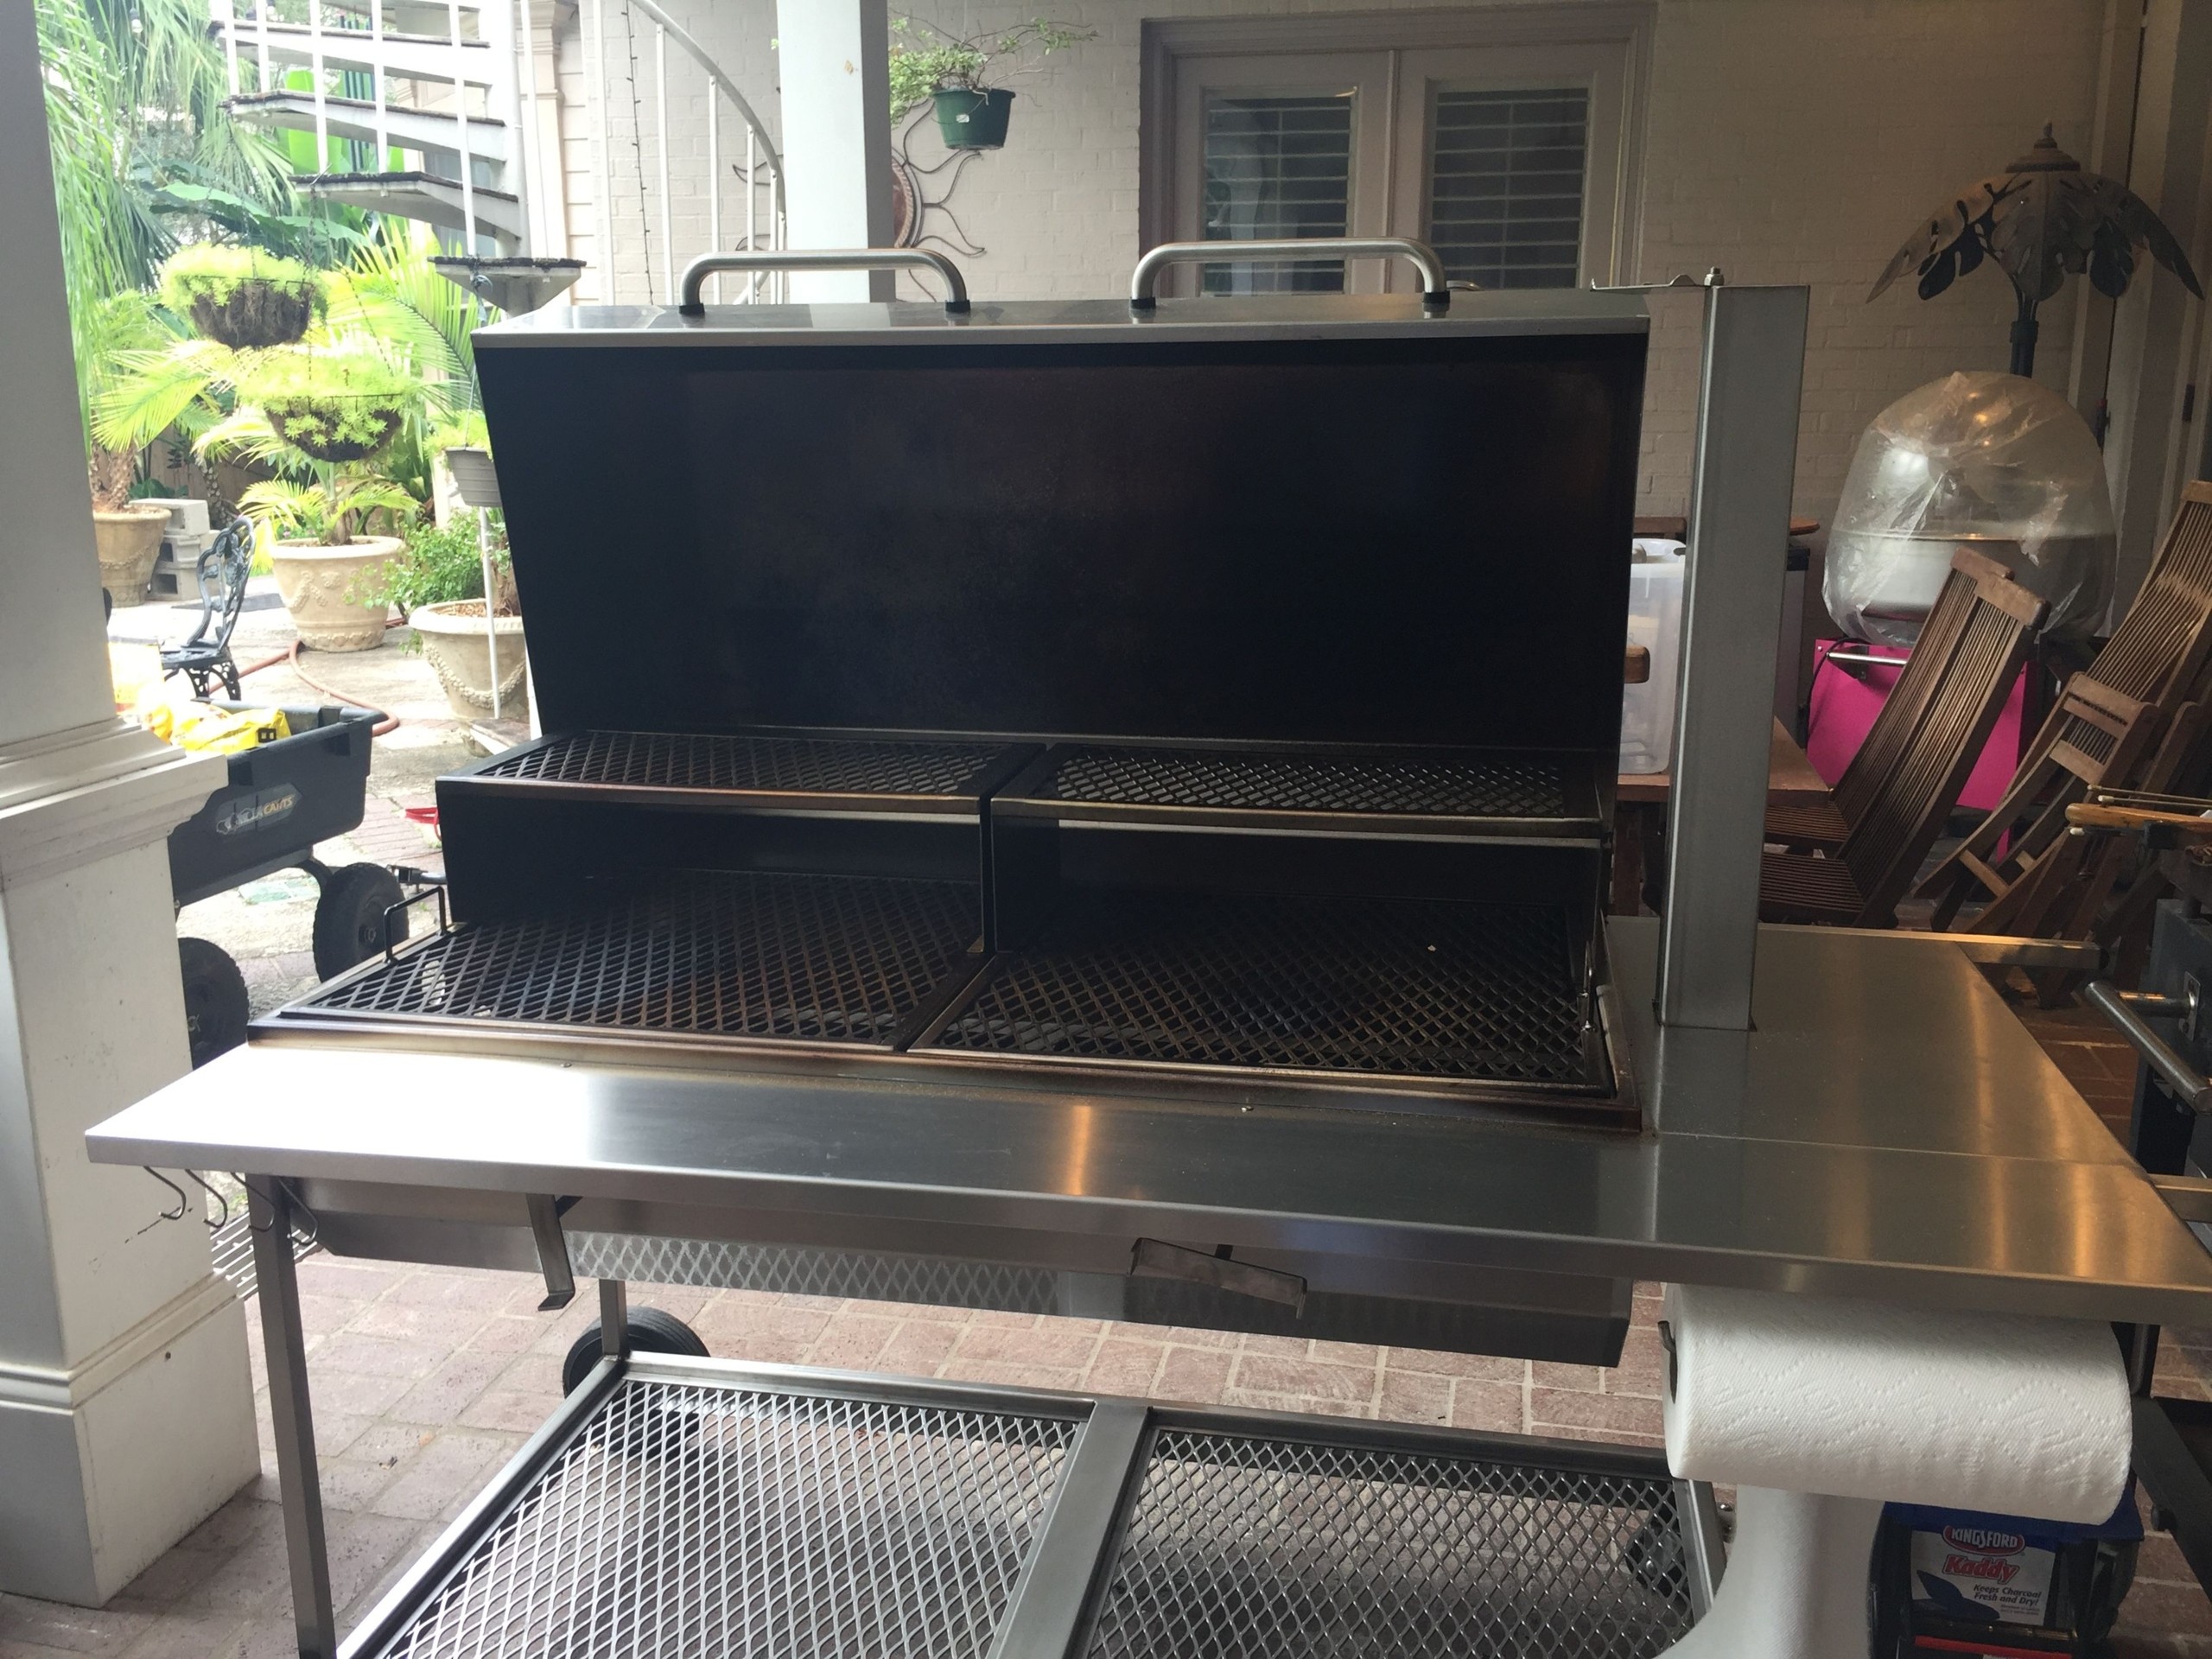 All stainless steel charcoal grill pm 200s xl 2